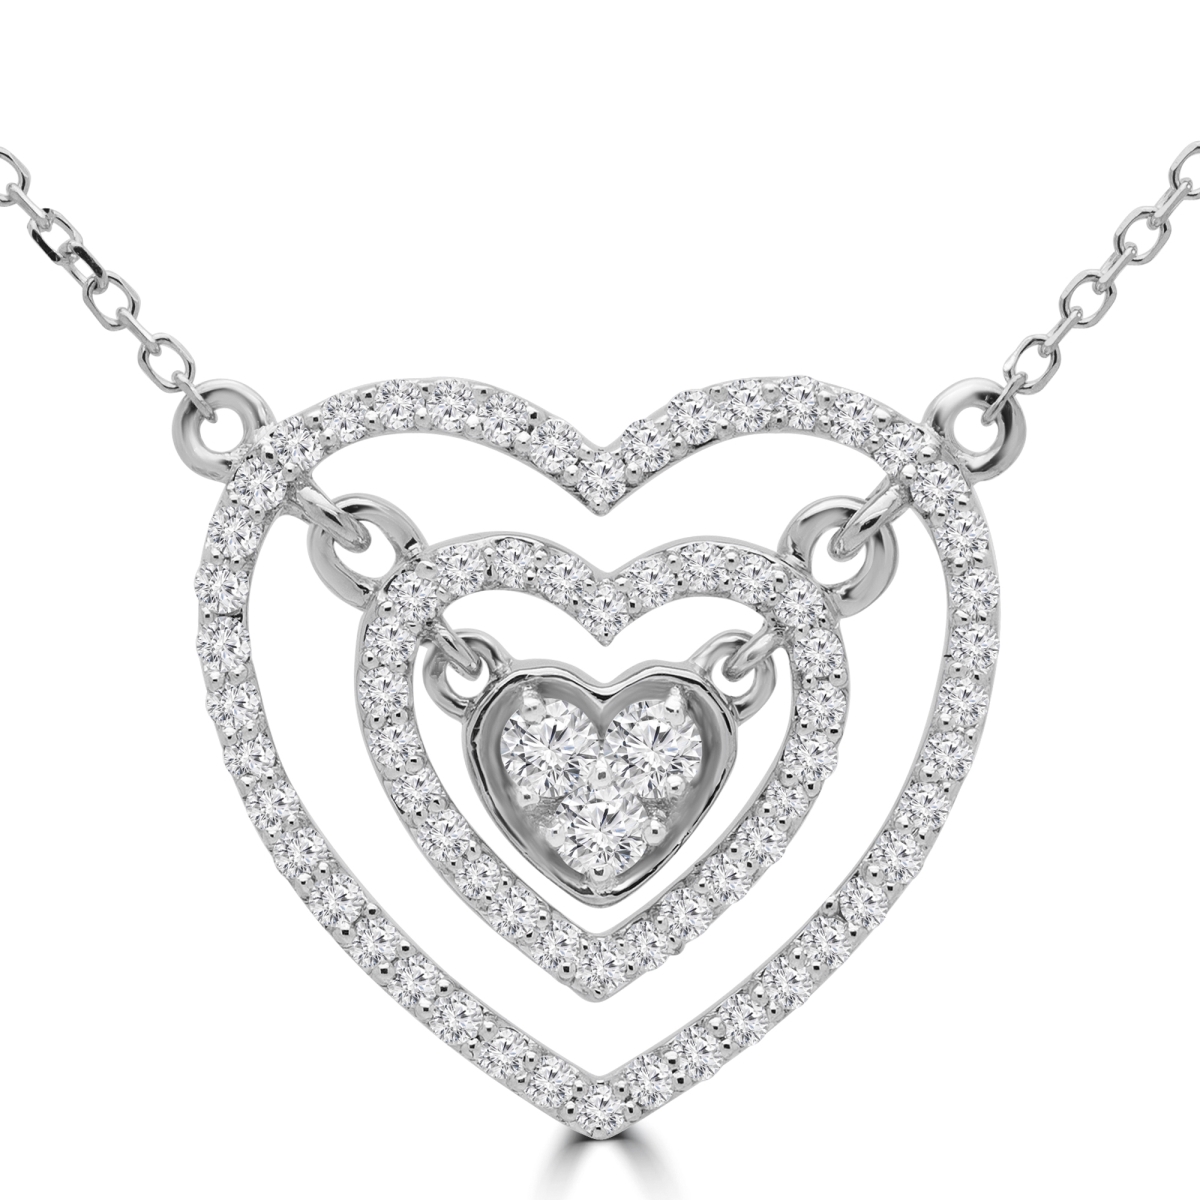 Mdr190019 0.33 Ctw Round Diamond Double Halo Cluster Heart Pendant Necklace In 18k White Gold With Chain